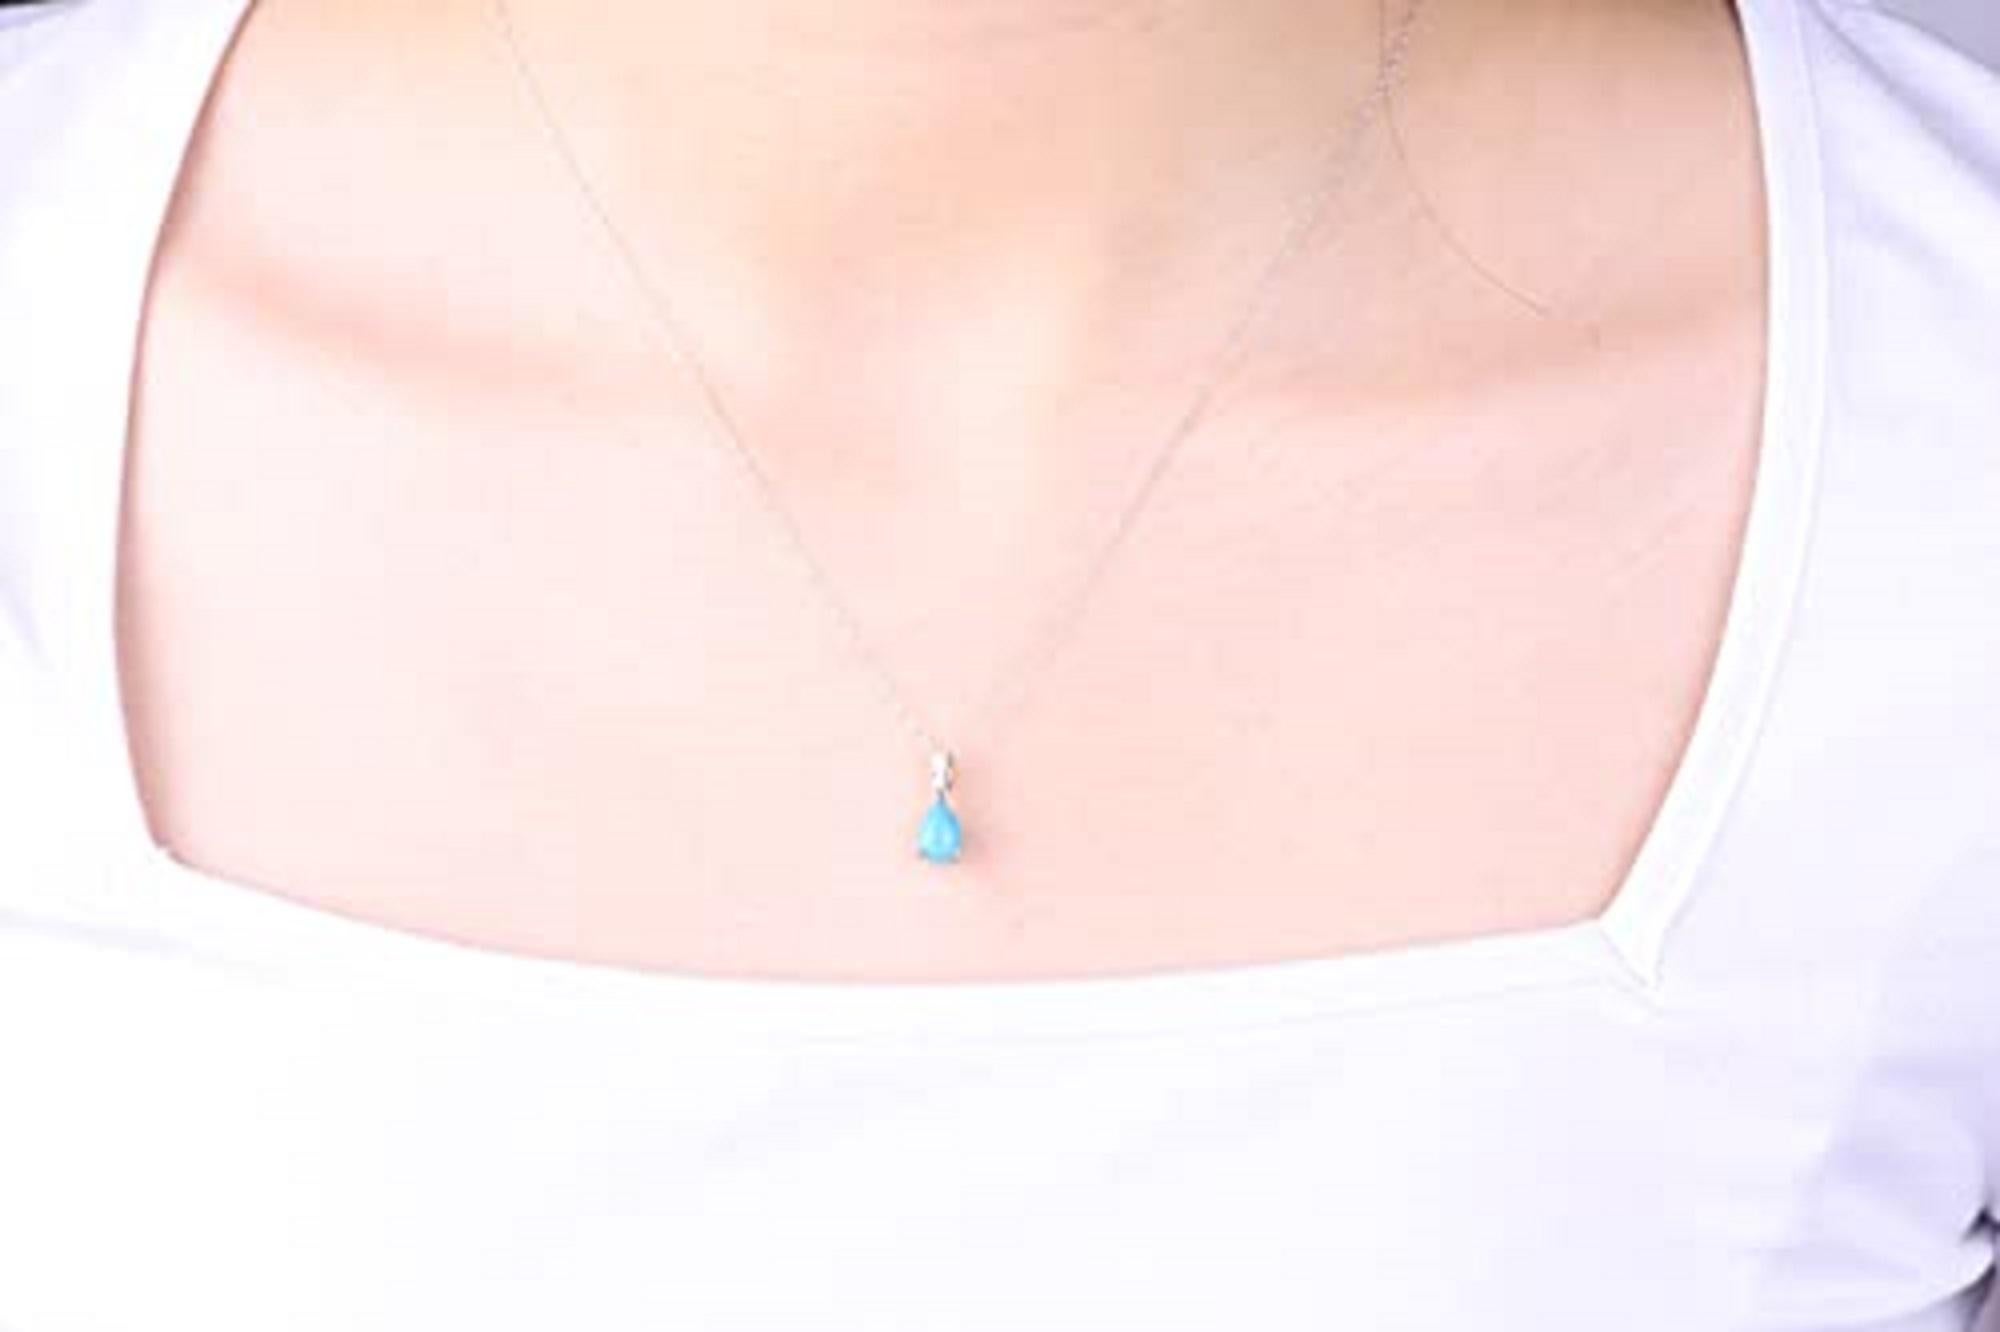 Decorate yourself in elegance with this Pendant is crafted from 10-karat White Gold by Gin & Grace Pendant. This Pendant is made up of 8x6 Pear-cabochon Prong setting Turquoise (1 Pcs) 1.02 Carat and Baguette-Cut Prong setting White Diamond (1 Pcs)